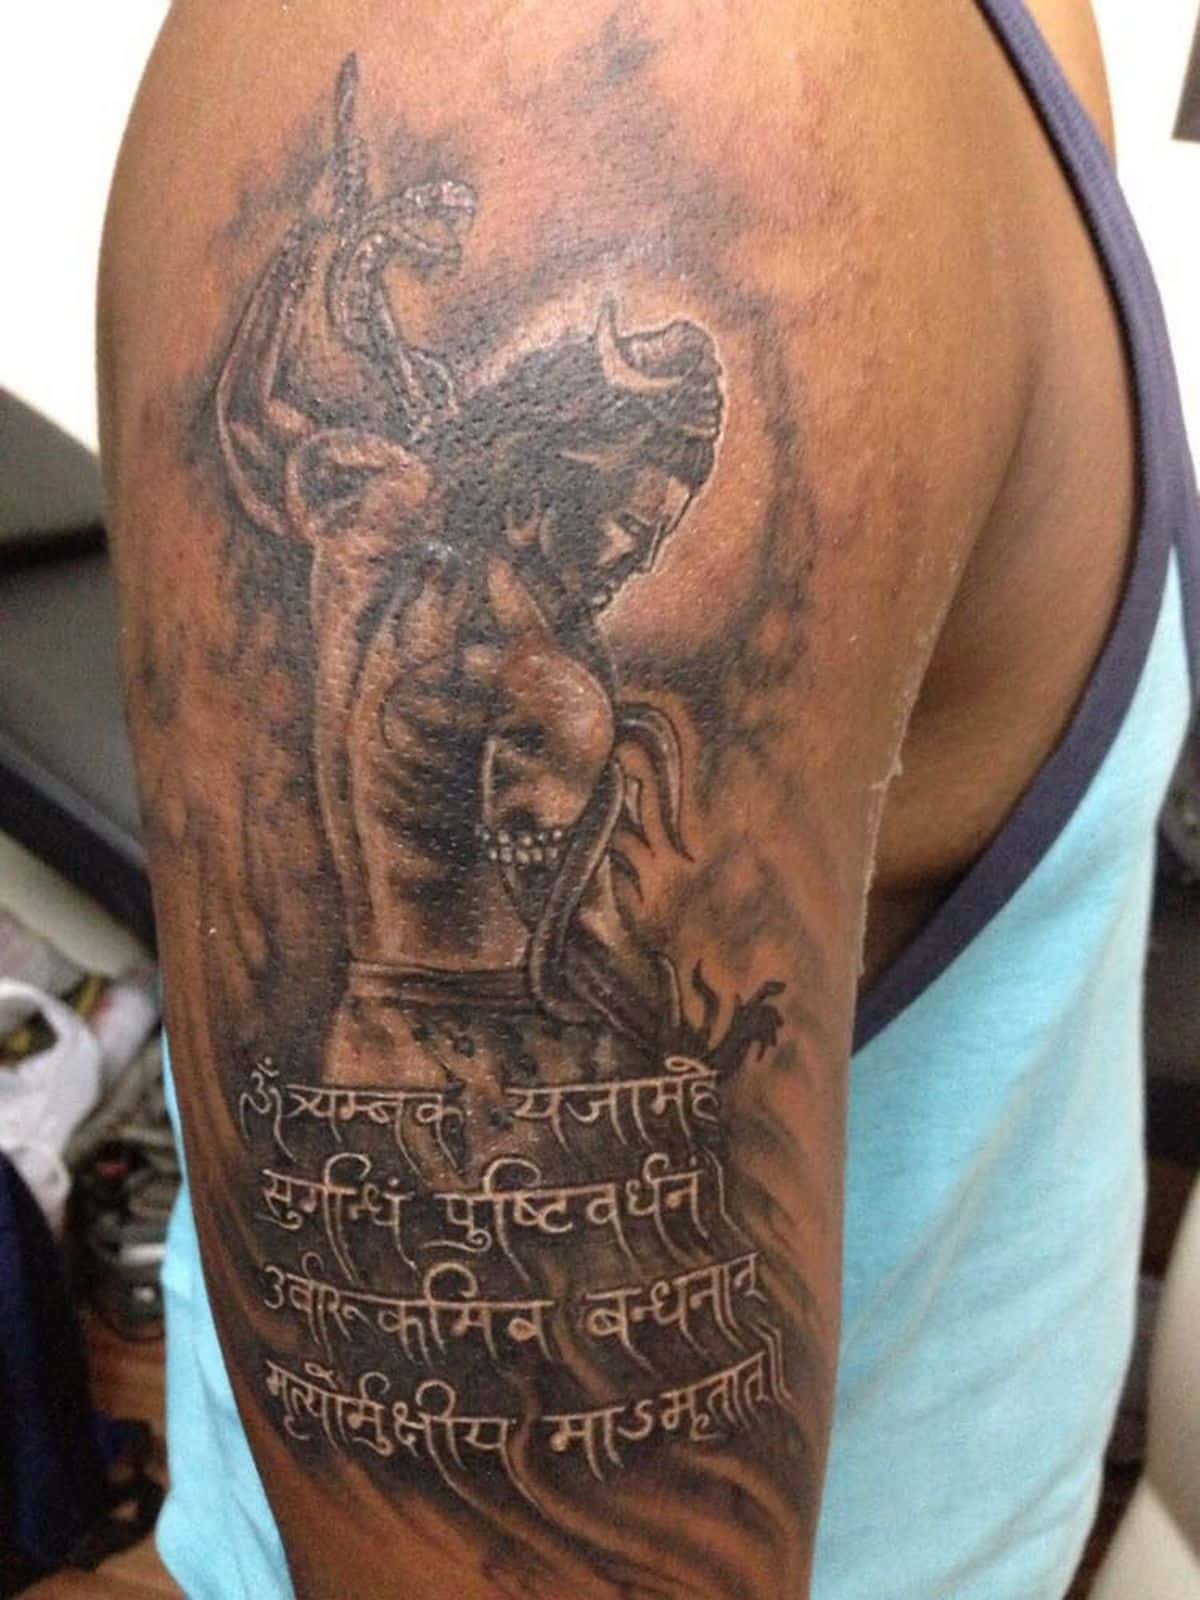 Contact for booking - 9915650840 Tattoo done by @mohaliink #tattooartist -  Jay $idhu #tattooshop - 112 sec 69 Market #mohali… | Instagram